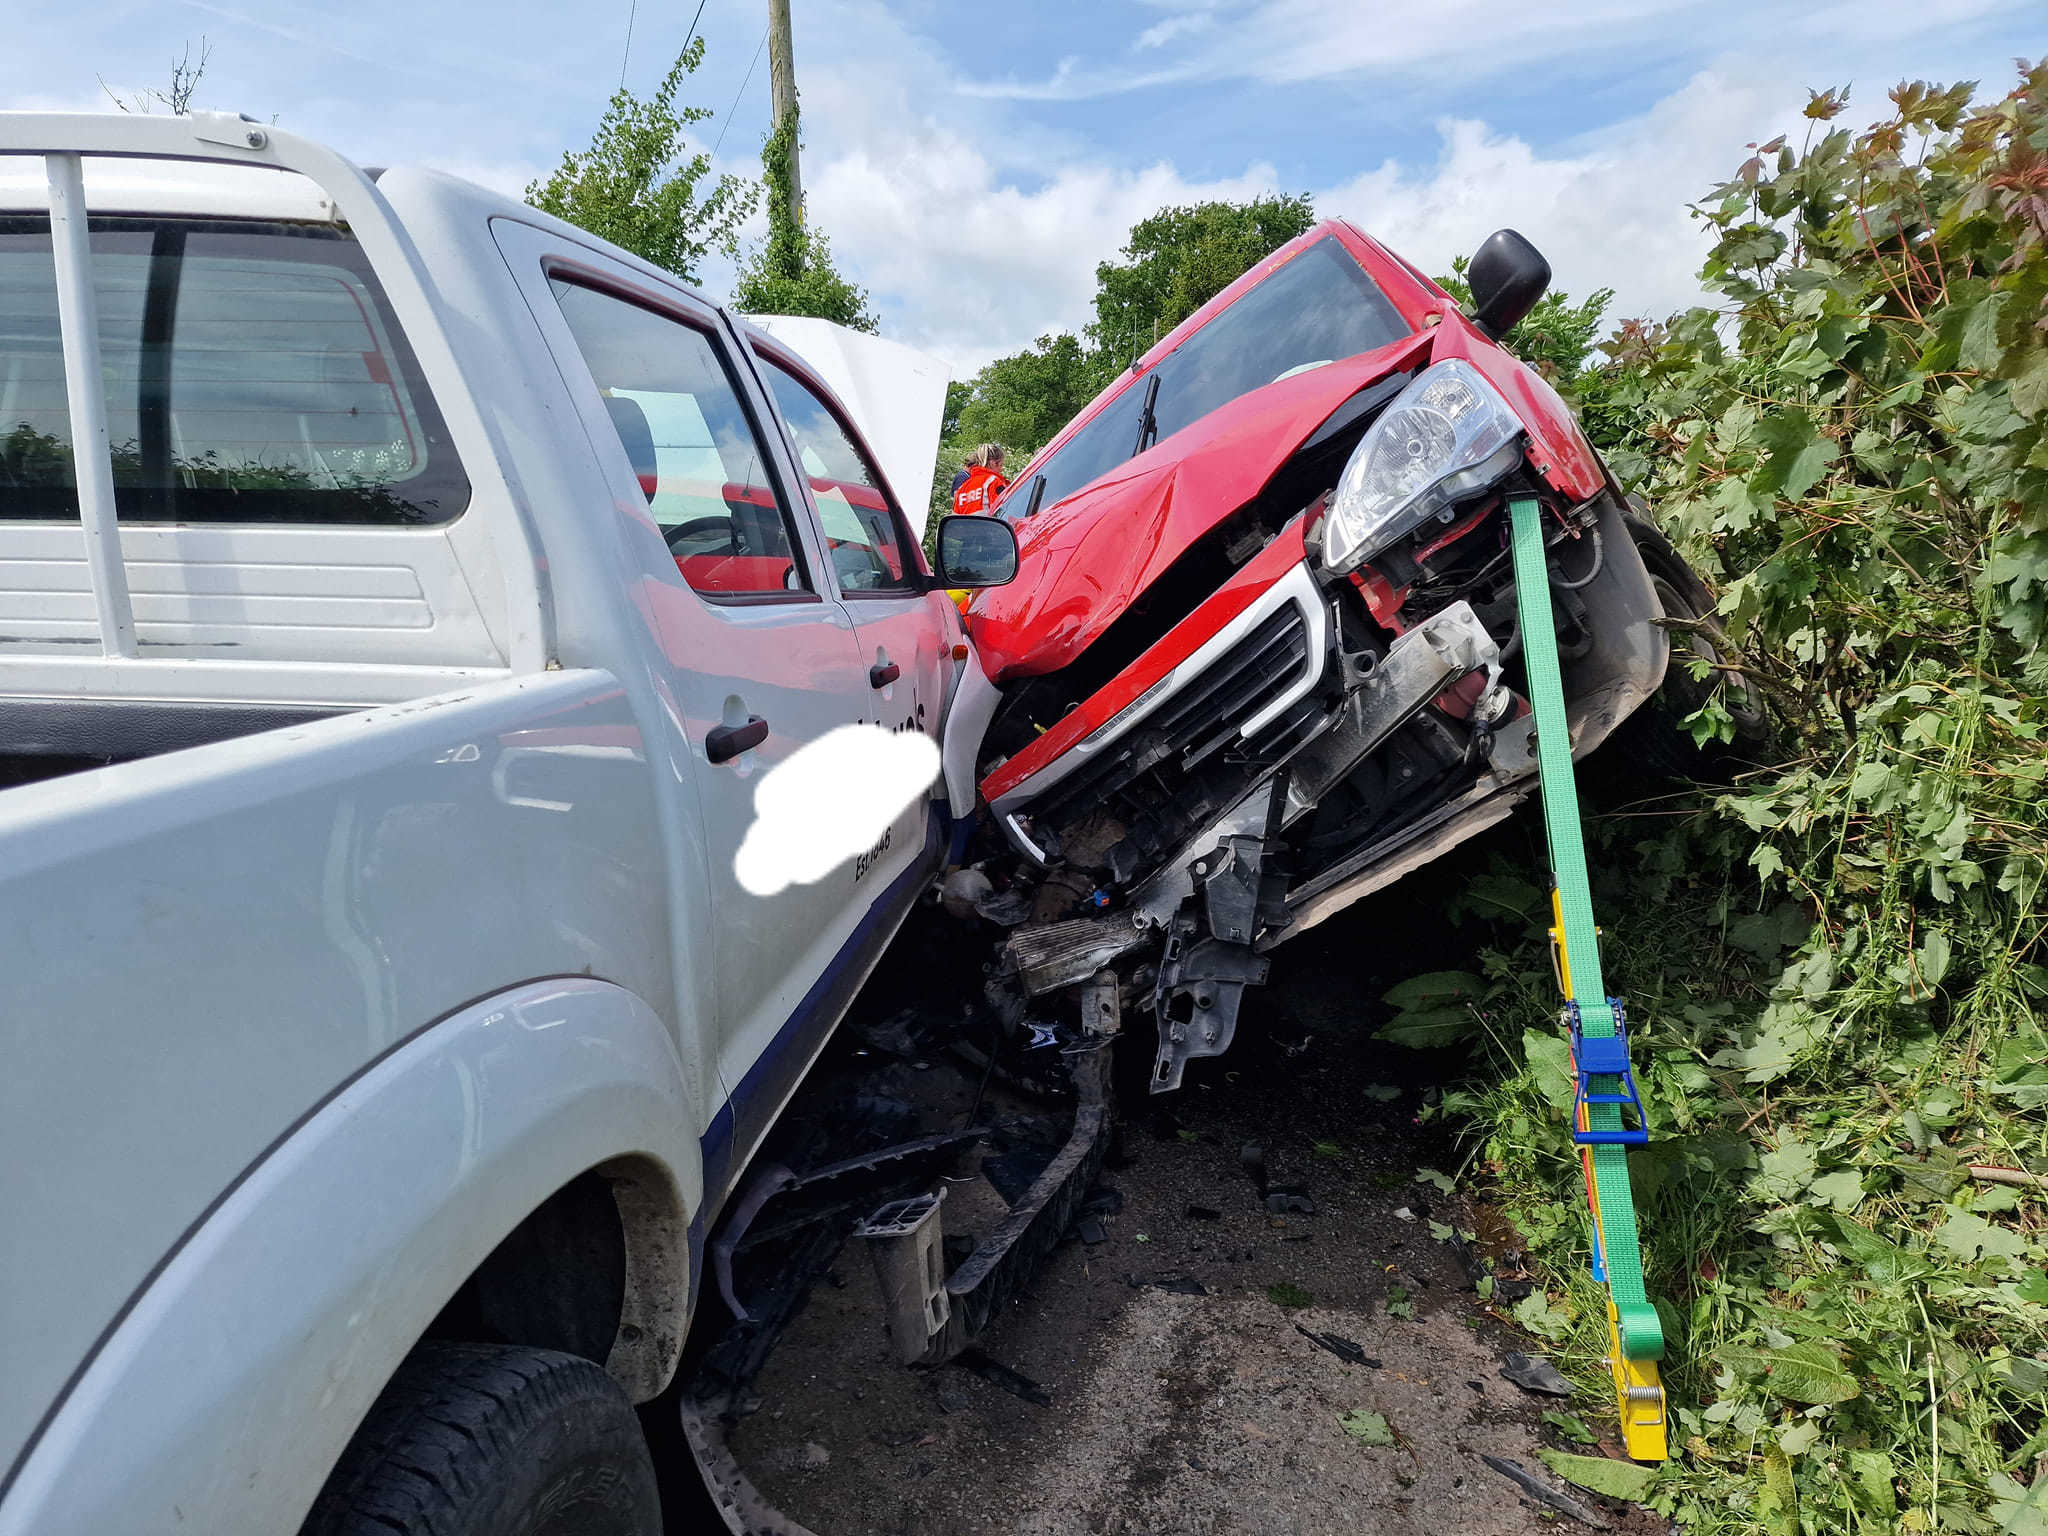 Fire crews, paramedics and police officers were all at the scene of the crash in Lyonshall. Picture: Kington fire station